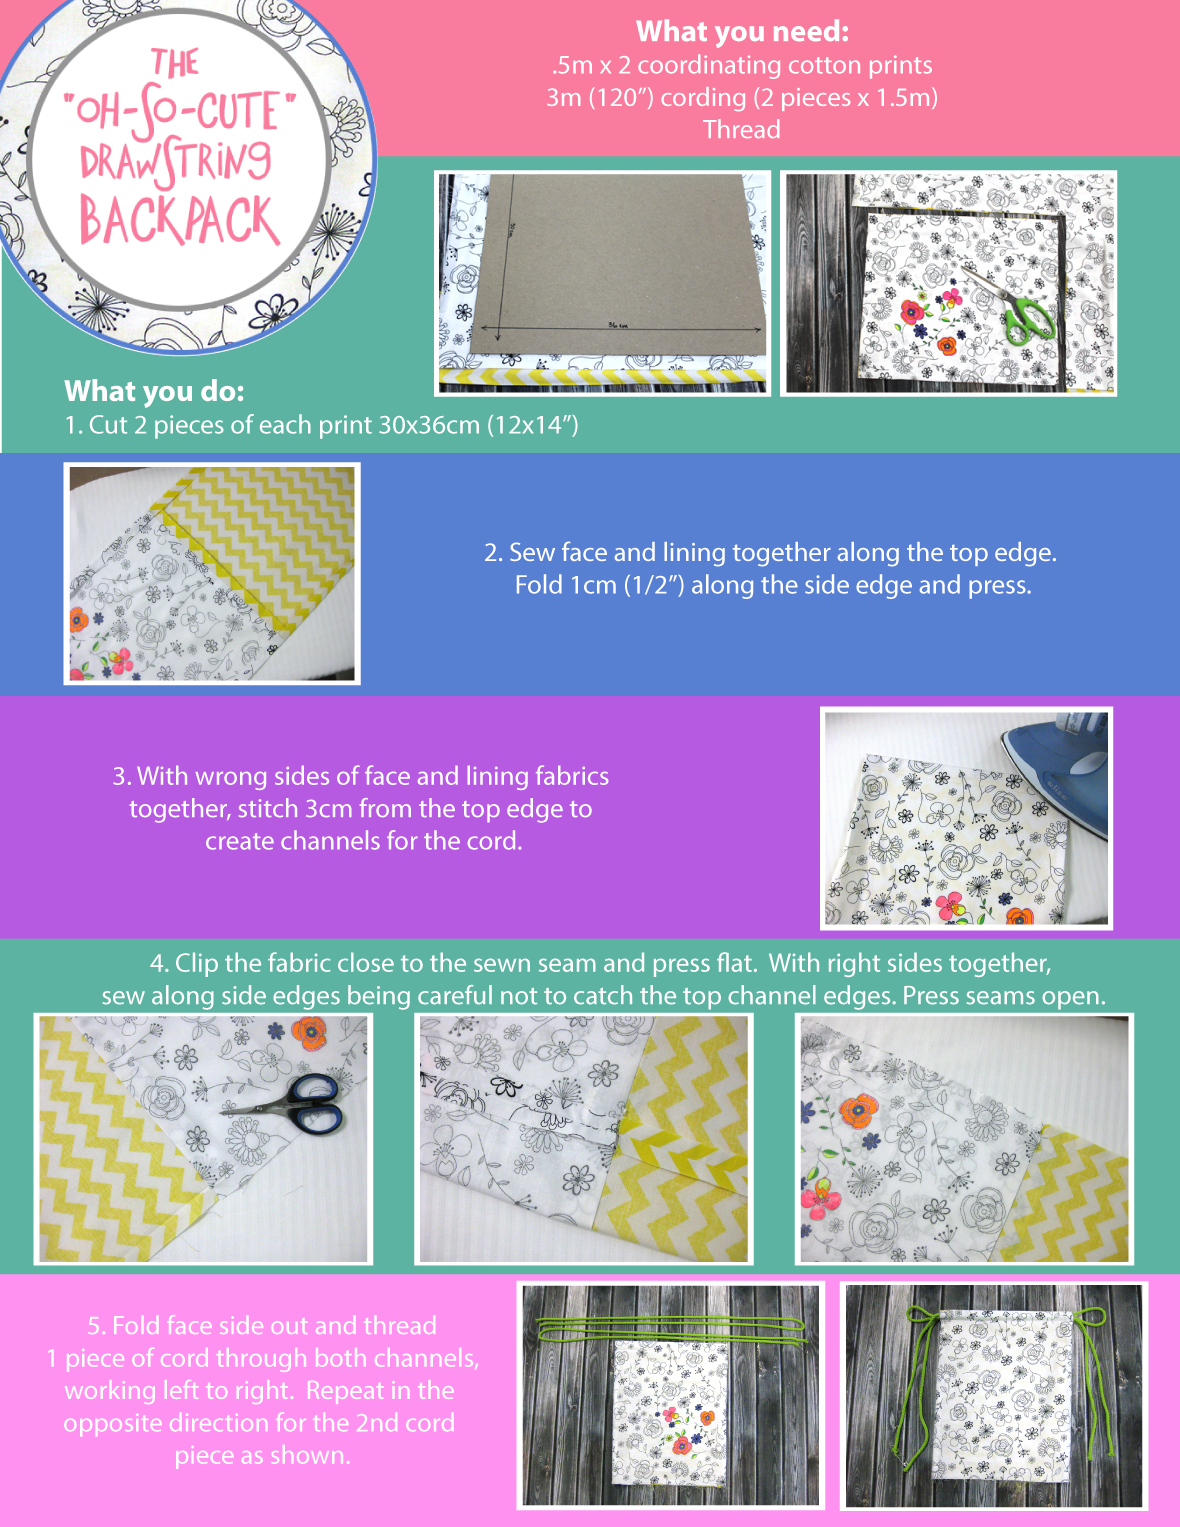 Materials & Steps 1 to 5 to create your cute drawstring backpack